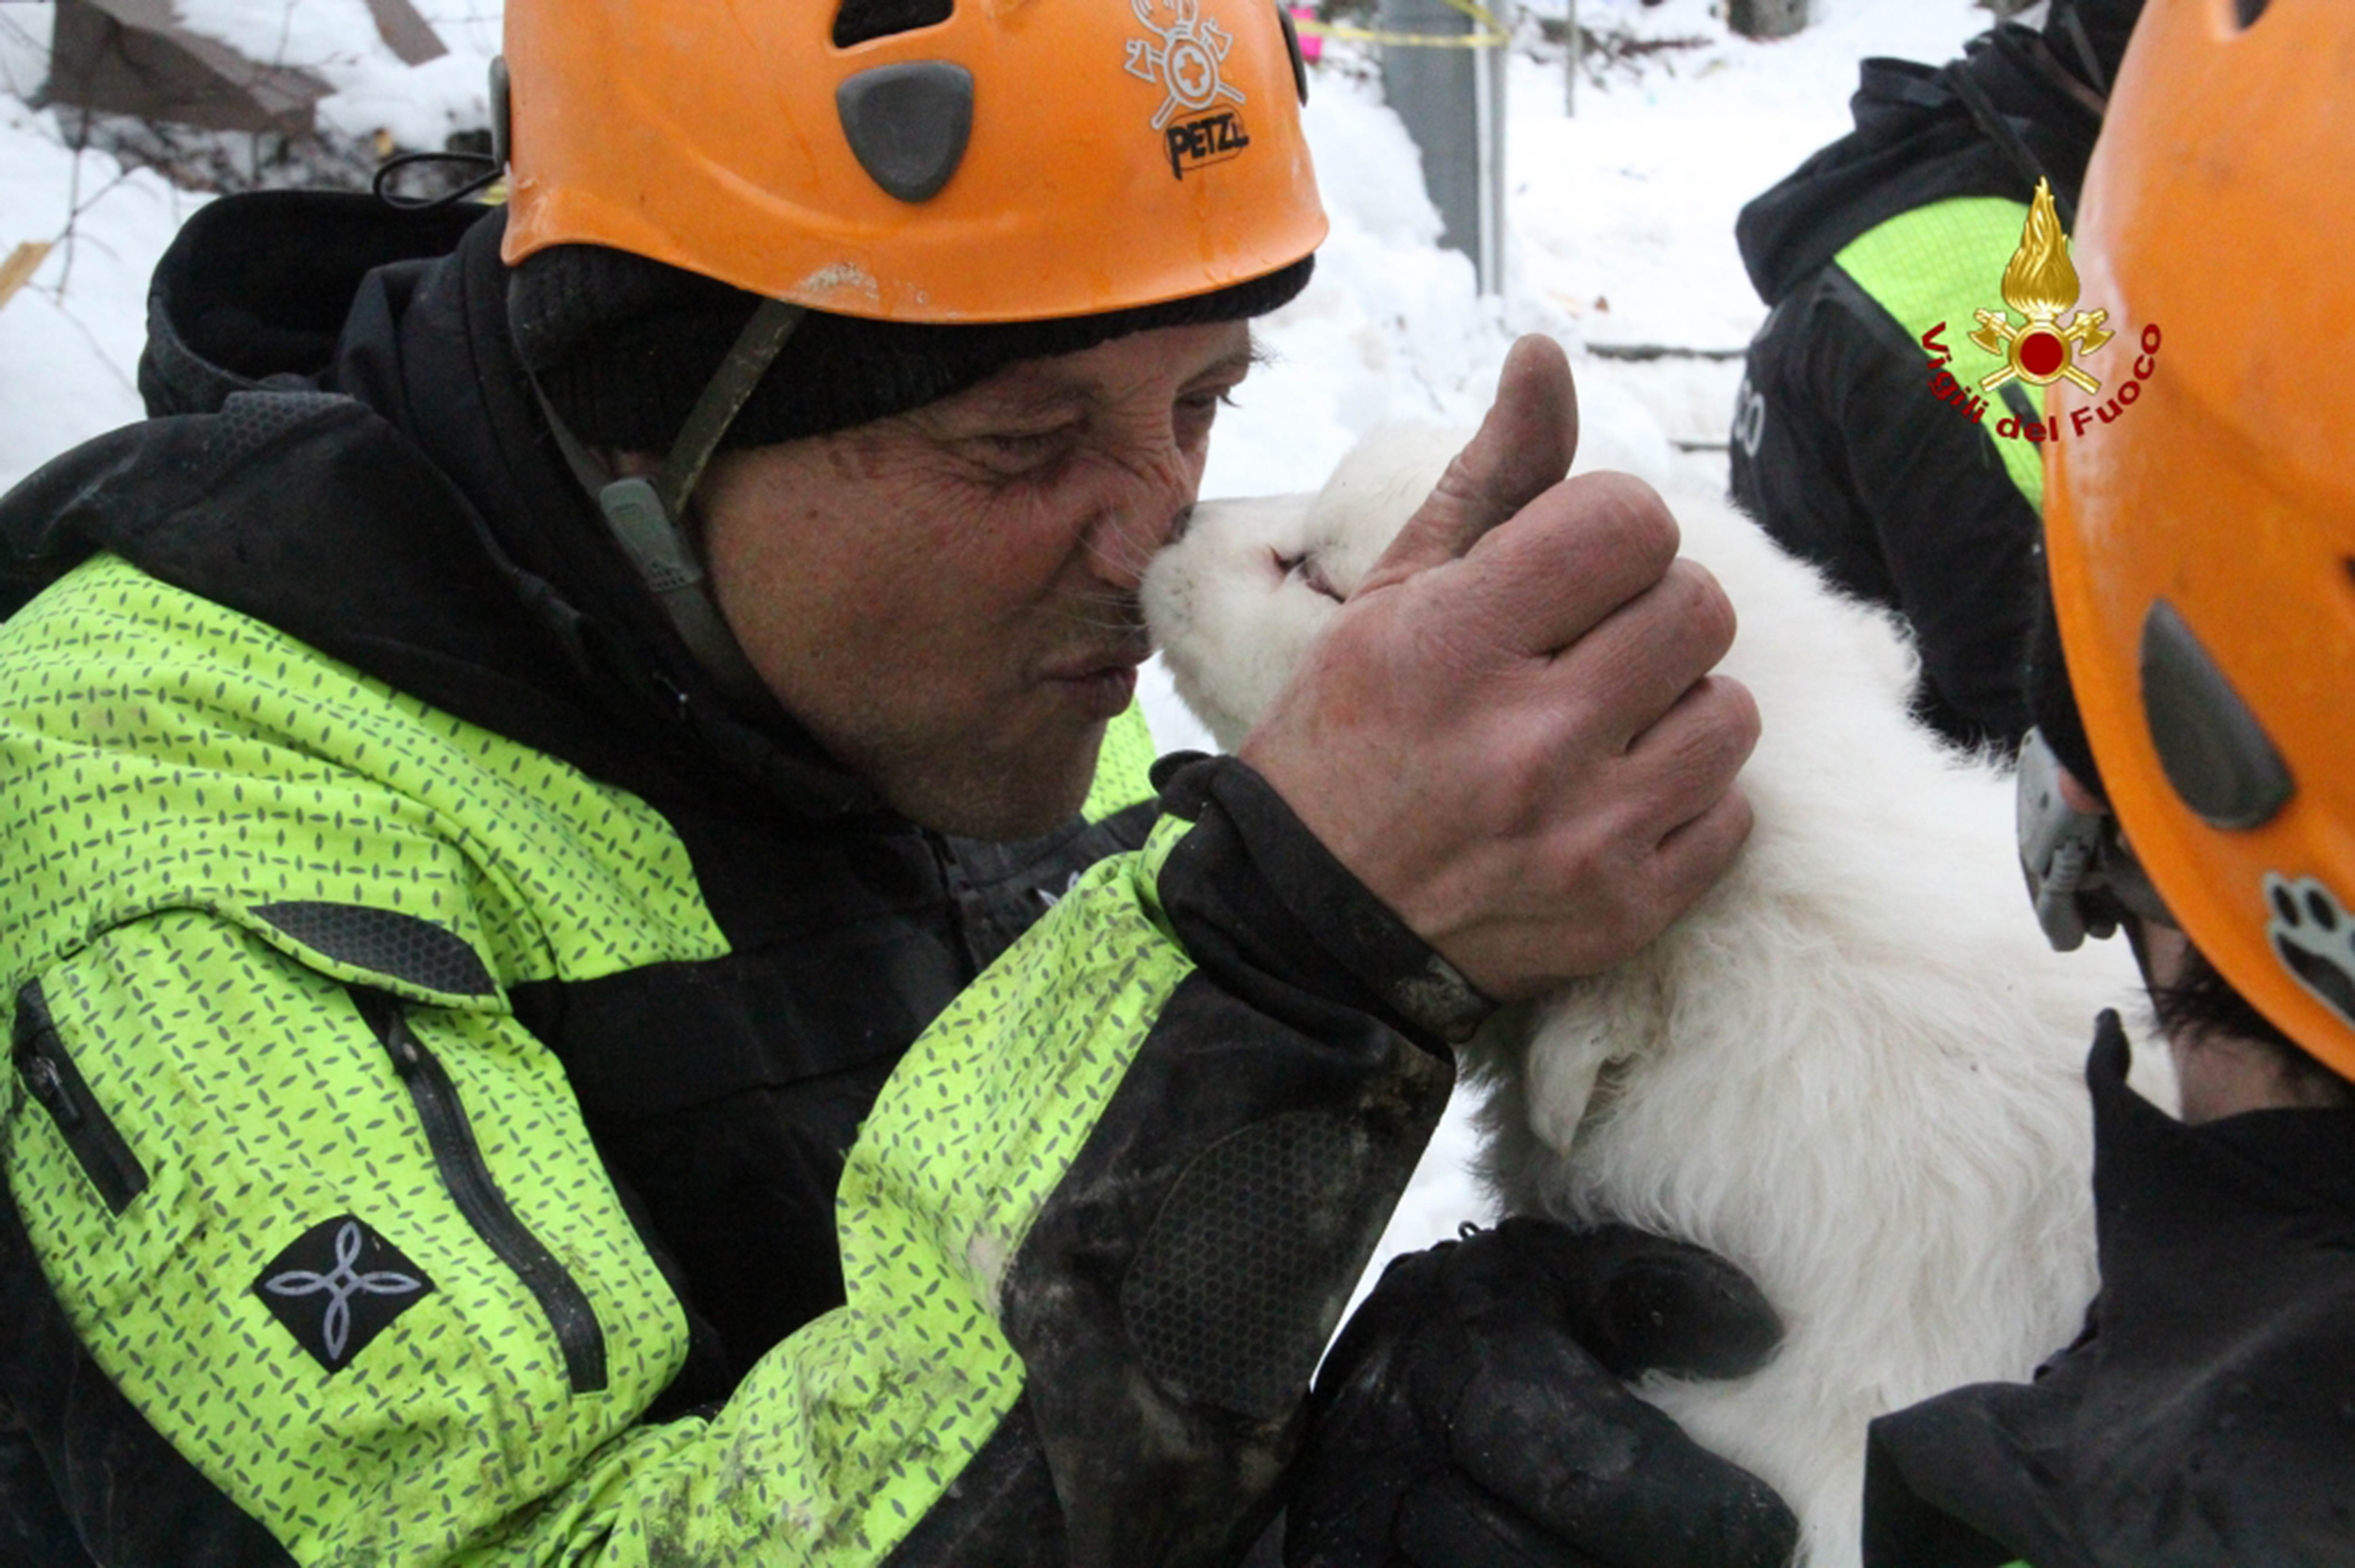 A handout picture released on January 23, 2017 by the Italian Firemen "Vigili del Fuoco" shows a fireman playing with a puppy found at the avalanche-hit Hotel Rigopiano, near the village of Farindola, on the eastern lower slopes of the Gran Sasso mountain. Fireman Fabio Jerman said three puppies had been found alive today in one of the air pockets under the rubble, which he said was "an important sign of life which gives us hope". Italian rescuers pulled nine survivors from the hotel hit by an avalanche on January 18, 2016 and continue to search the 23 people still trapped under the ruins. A sixth victim was pulled out of the rubble and snow yesterday. / AFP PHOTO / AFP PHOTO AND Vigili del Fuoco / Fabio GATTO / RESTRICTED TO EDITORIAL USE - MANDATORY CREDIT "AFP PHOTO / VIGILI DEL FUOCO " - NO MARKETING NO ADVERTISING CAMPAIGNS - DISTRIBUTED AS A SERVICE TO CLIENTS